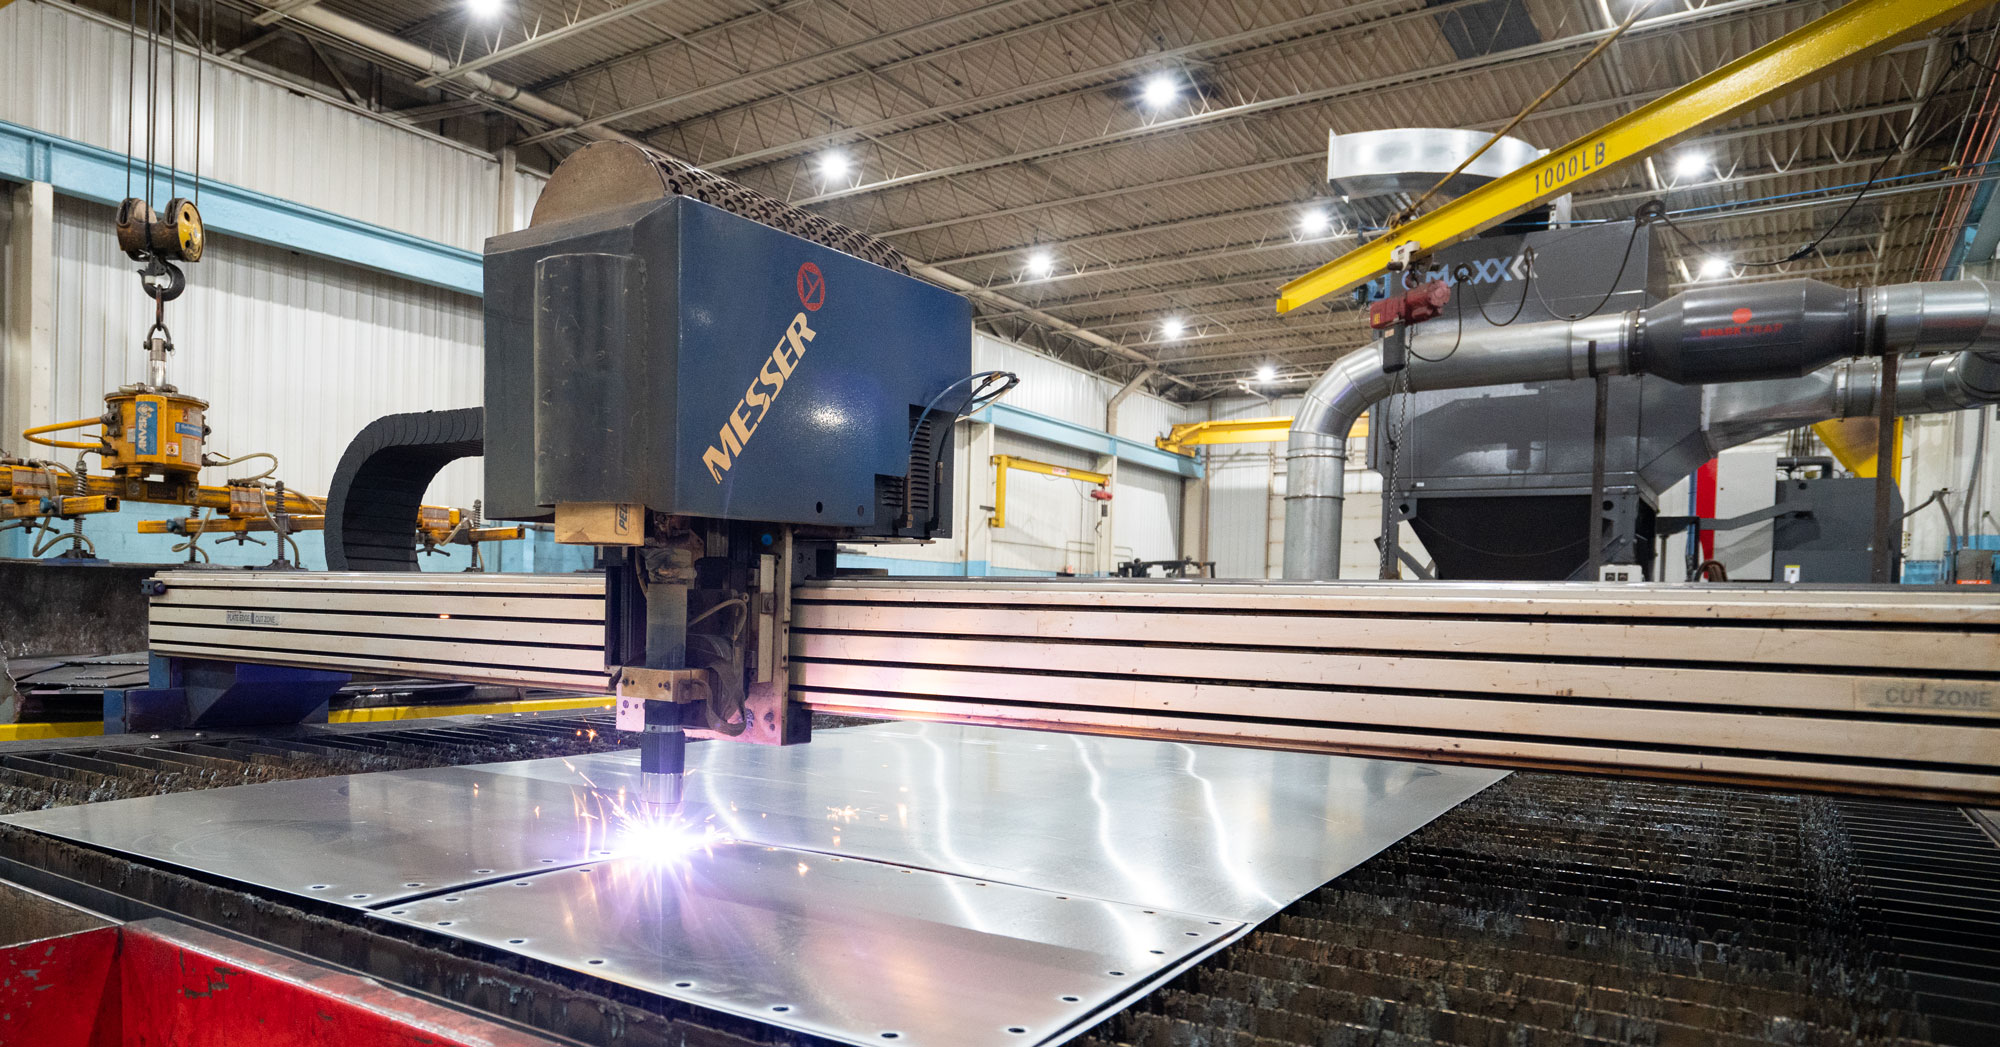 Plasma cutting table in operation with CMAXX capturing its dangerous fumes